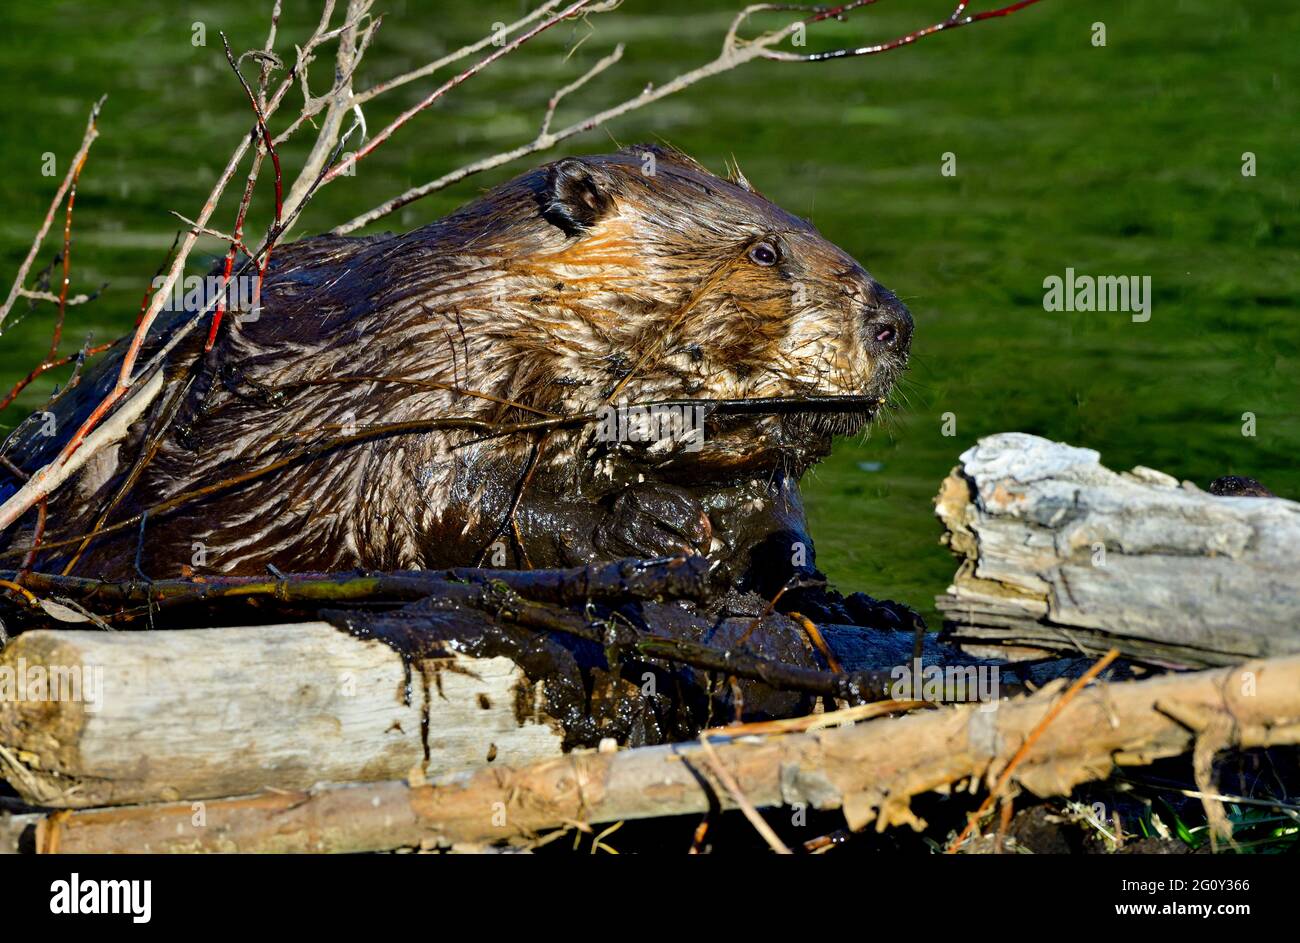 A side view of a wild beaver 'Castor canadensis', adding some wet mud to a leaking beaver pond in rural Alberta Canada. Stock Photo